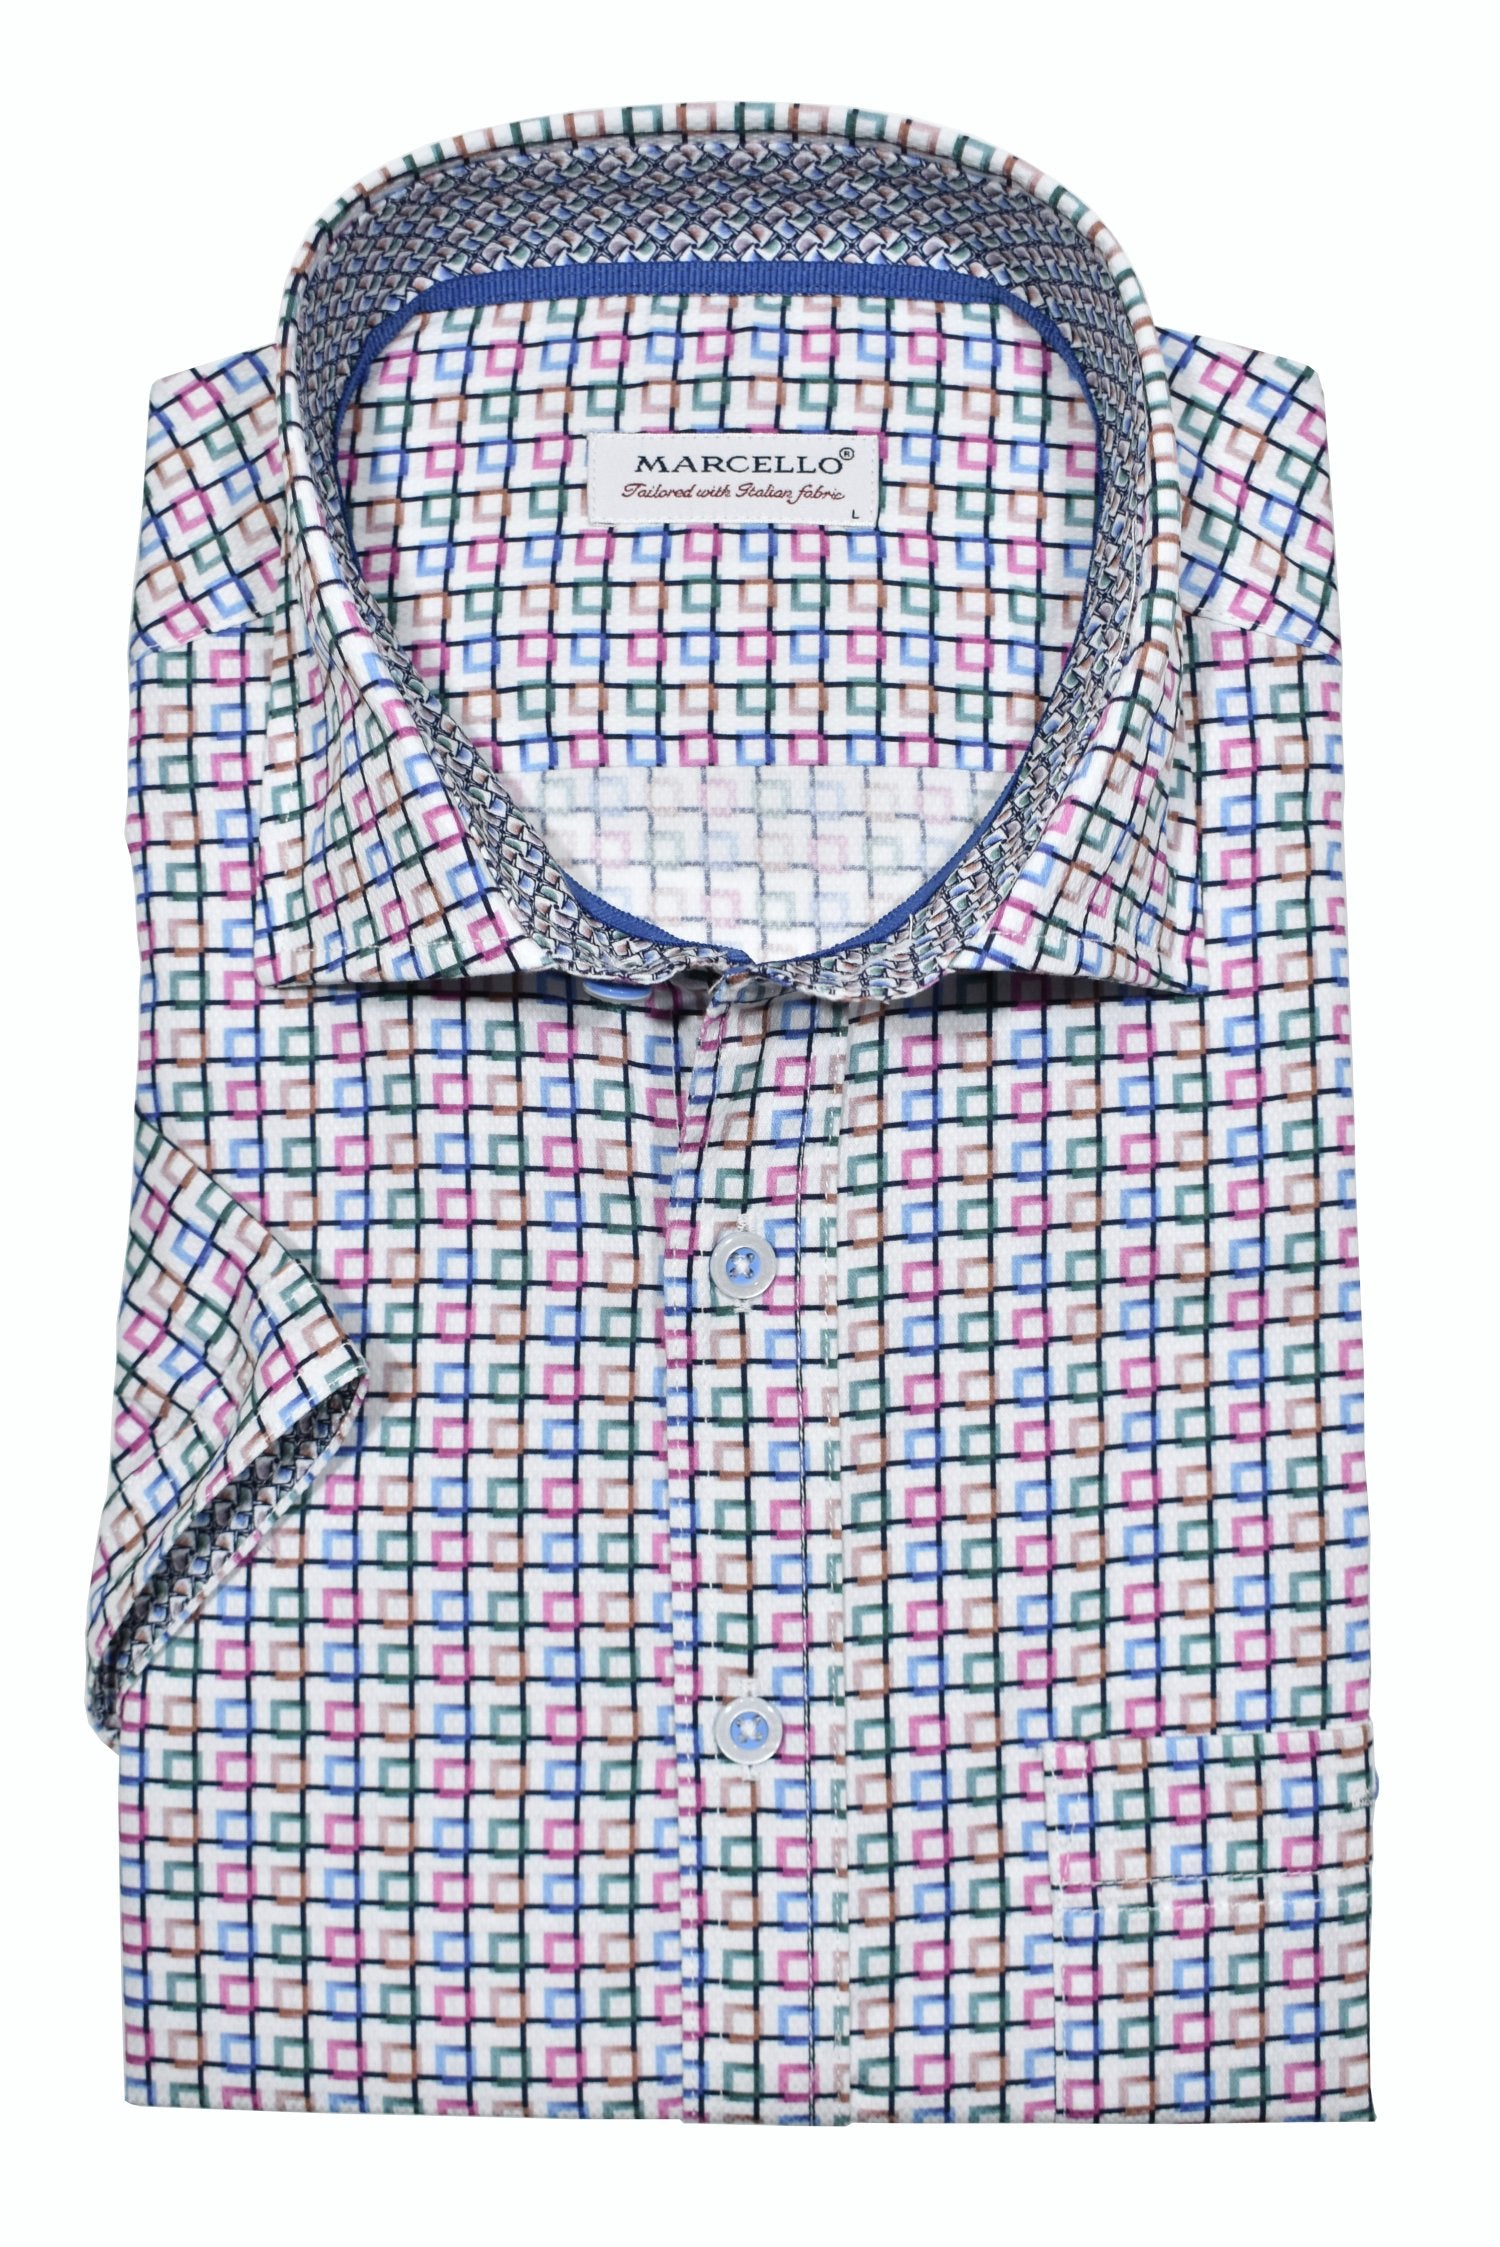 Luxurious cotton fabric, eye-catching open square pattern in beautiful gem hue colors. Elegant style ideal for any event. Short sleeve Marcello Shirt.